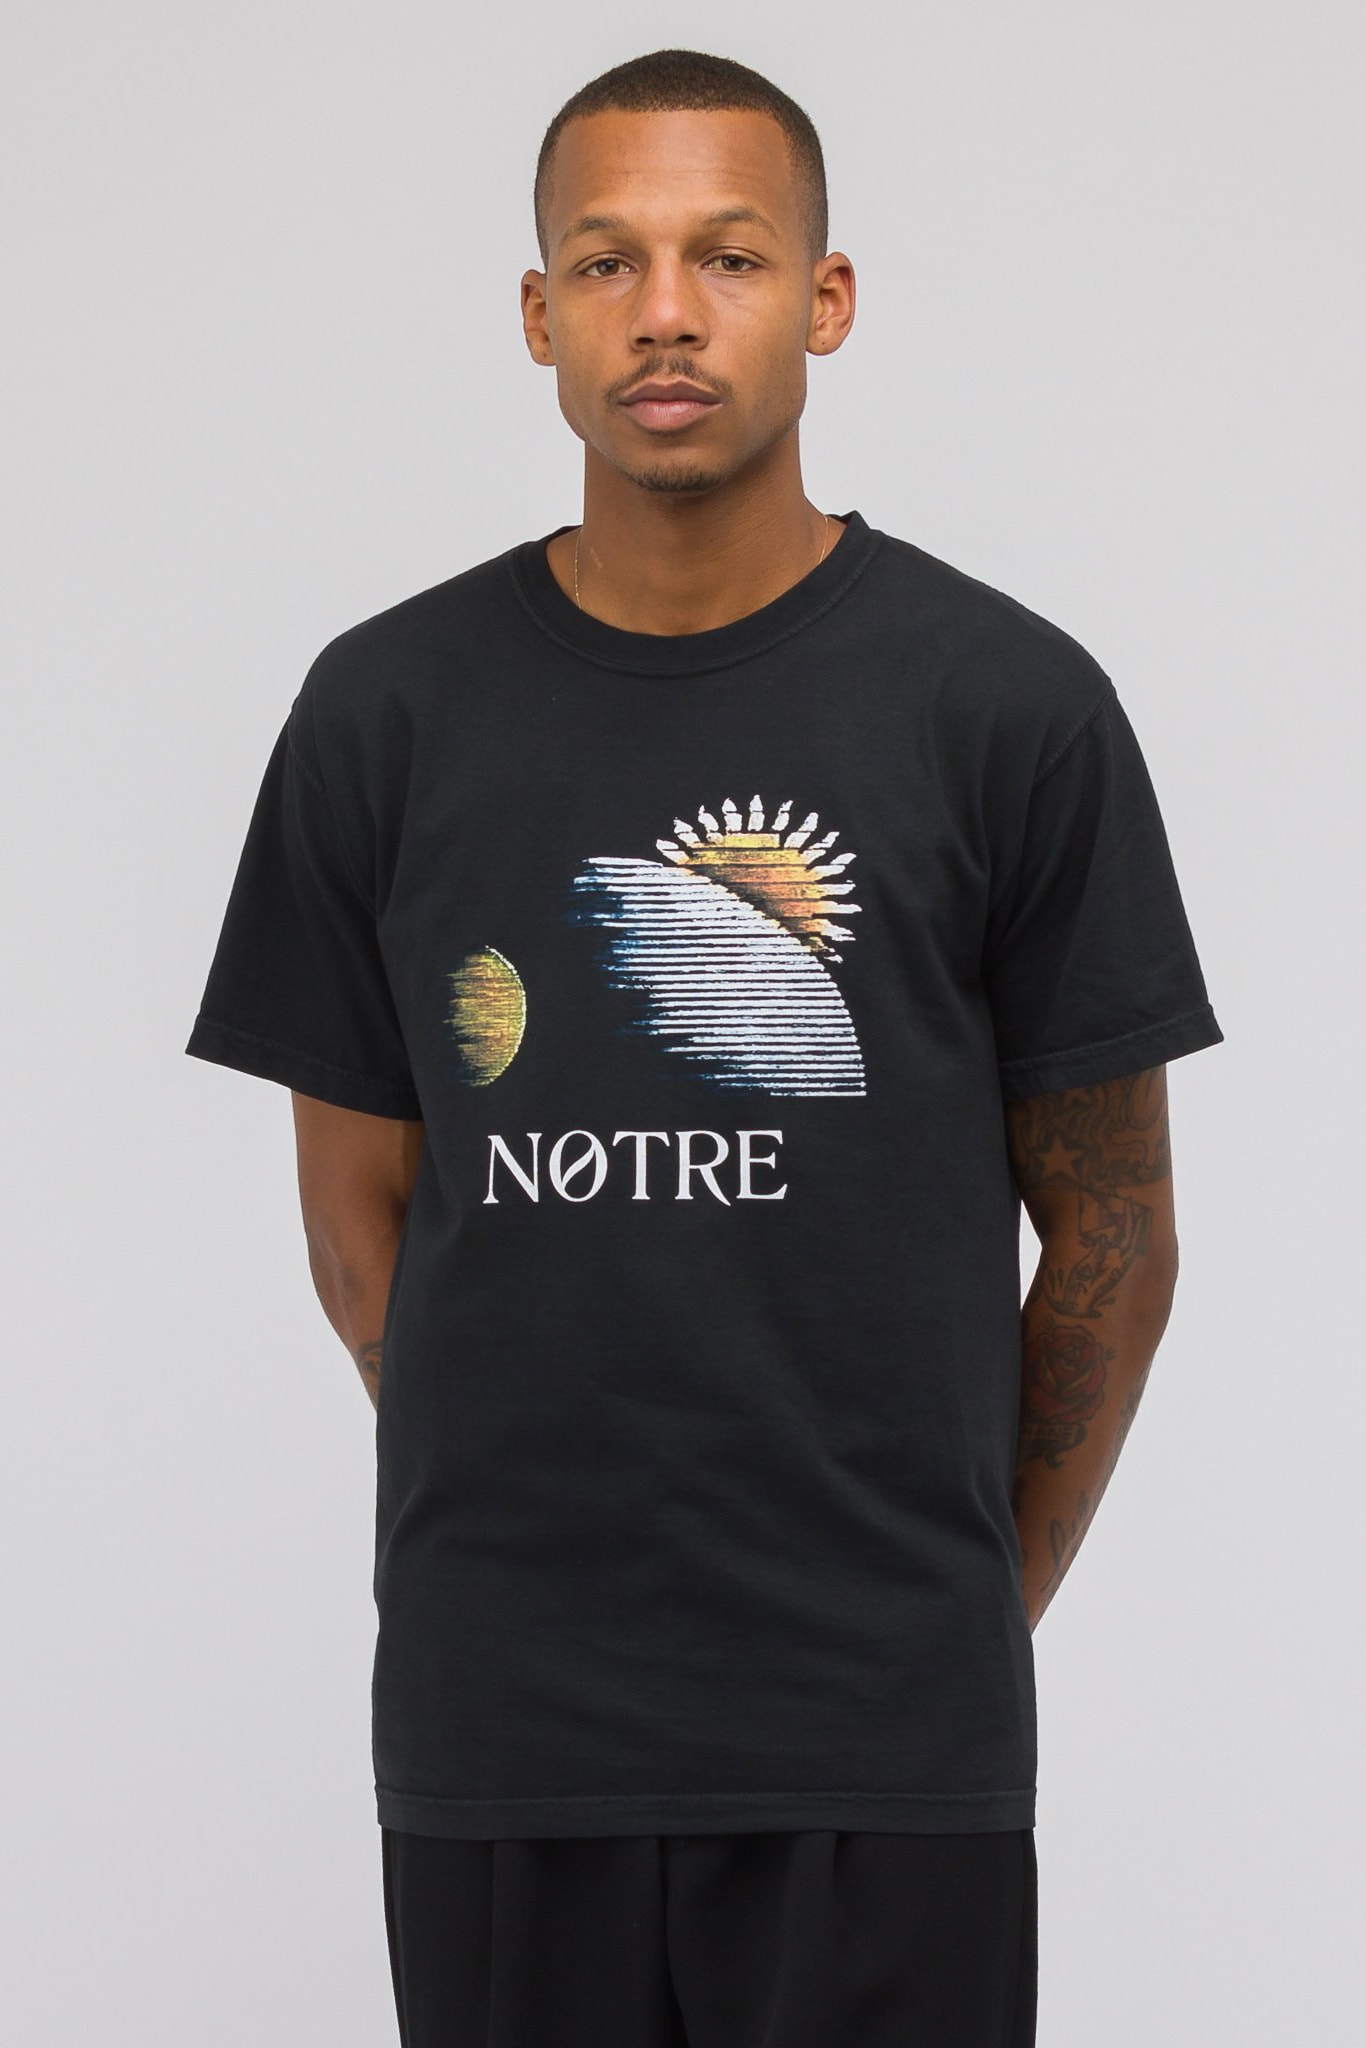 Notre private label tee shirt drop 1 first collection release drop tie dye print embroidery chuck berry